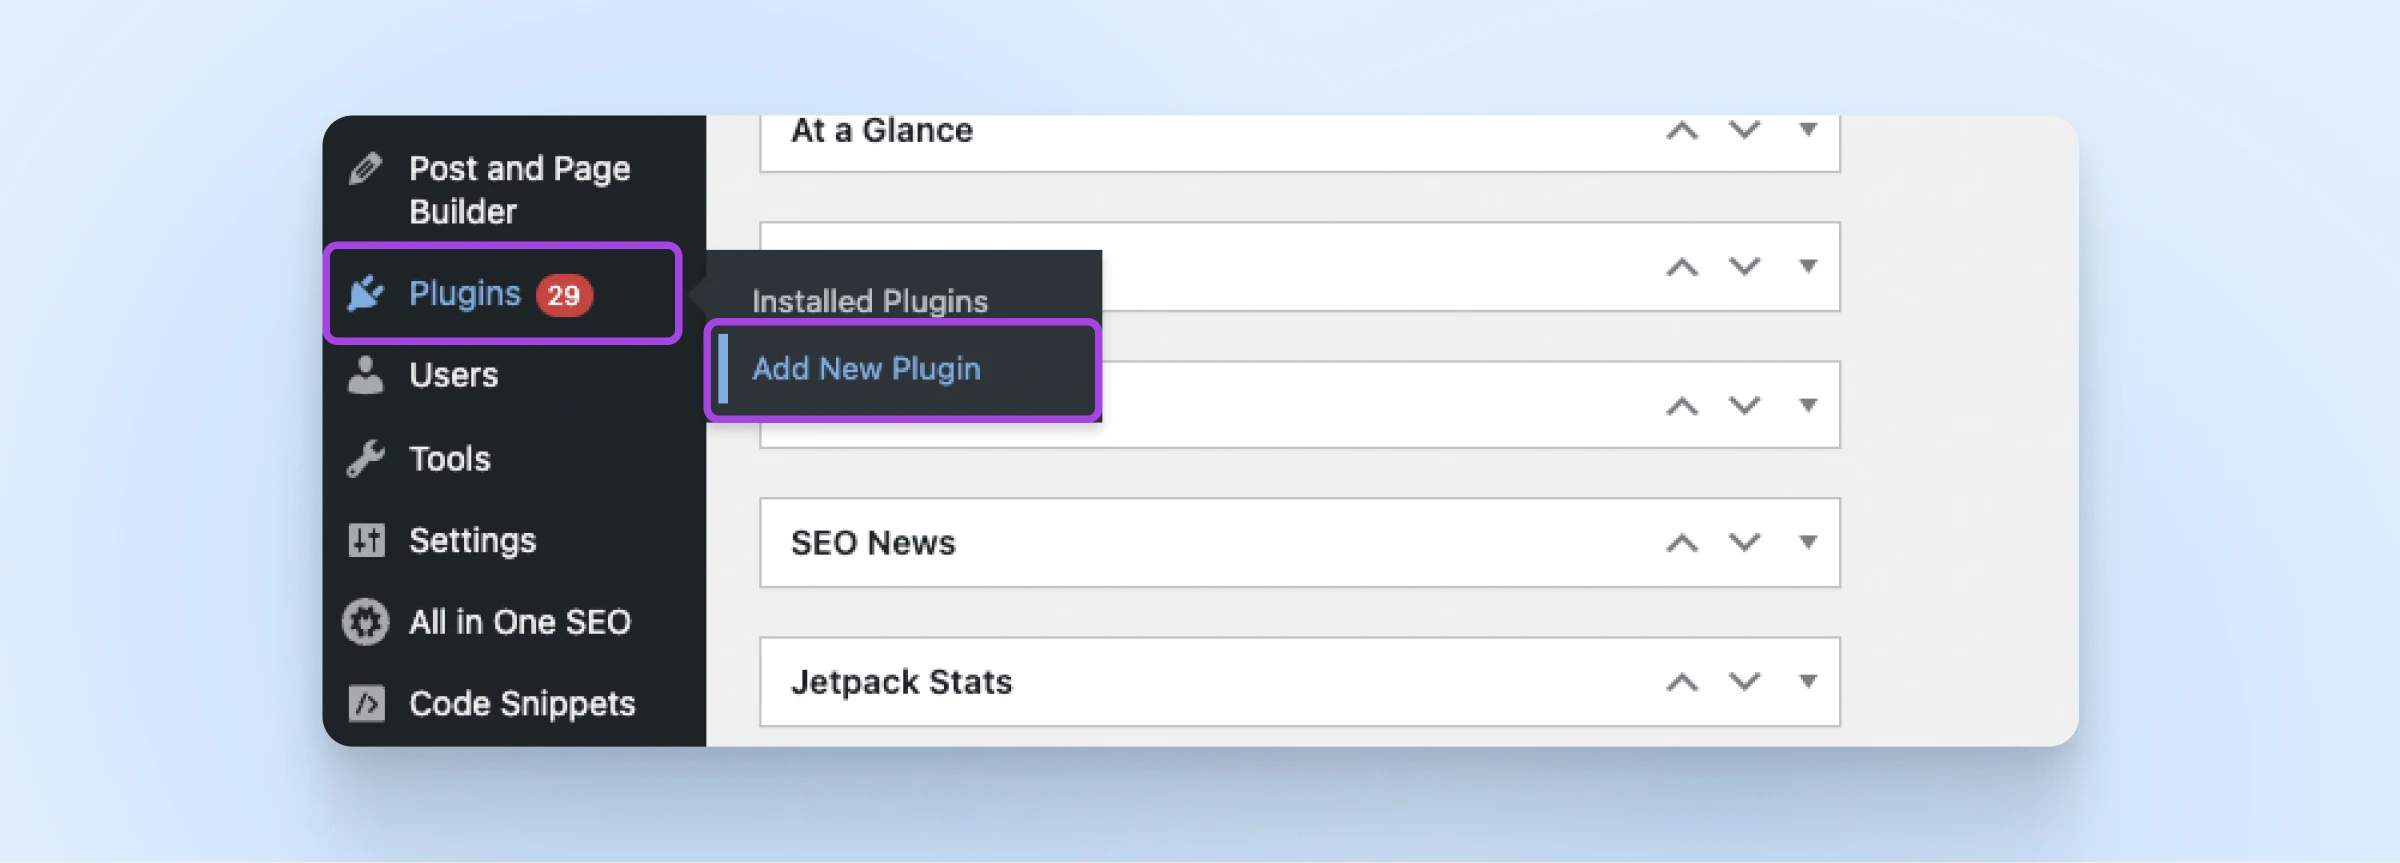 Plugins menu from the WordPress sidebar with the button "Add New Plugin" selected. 